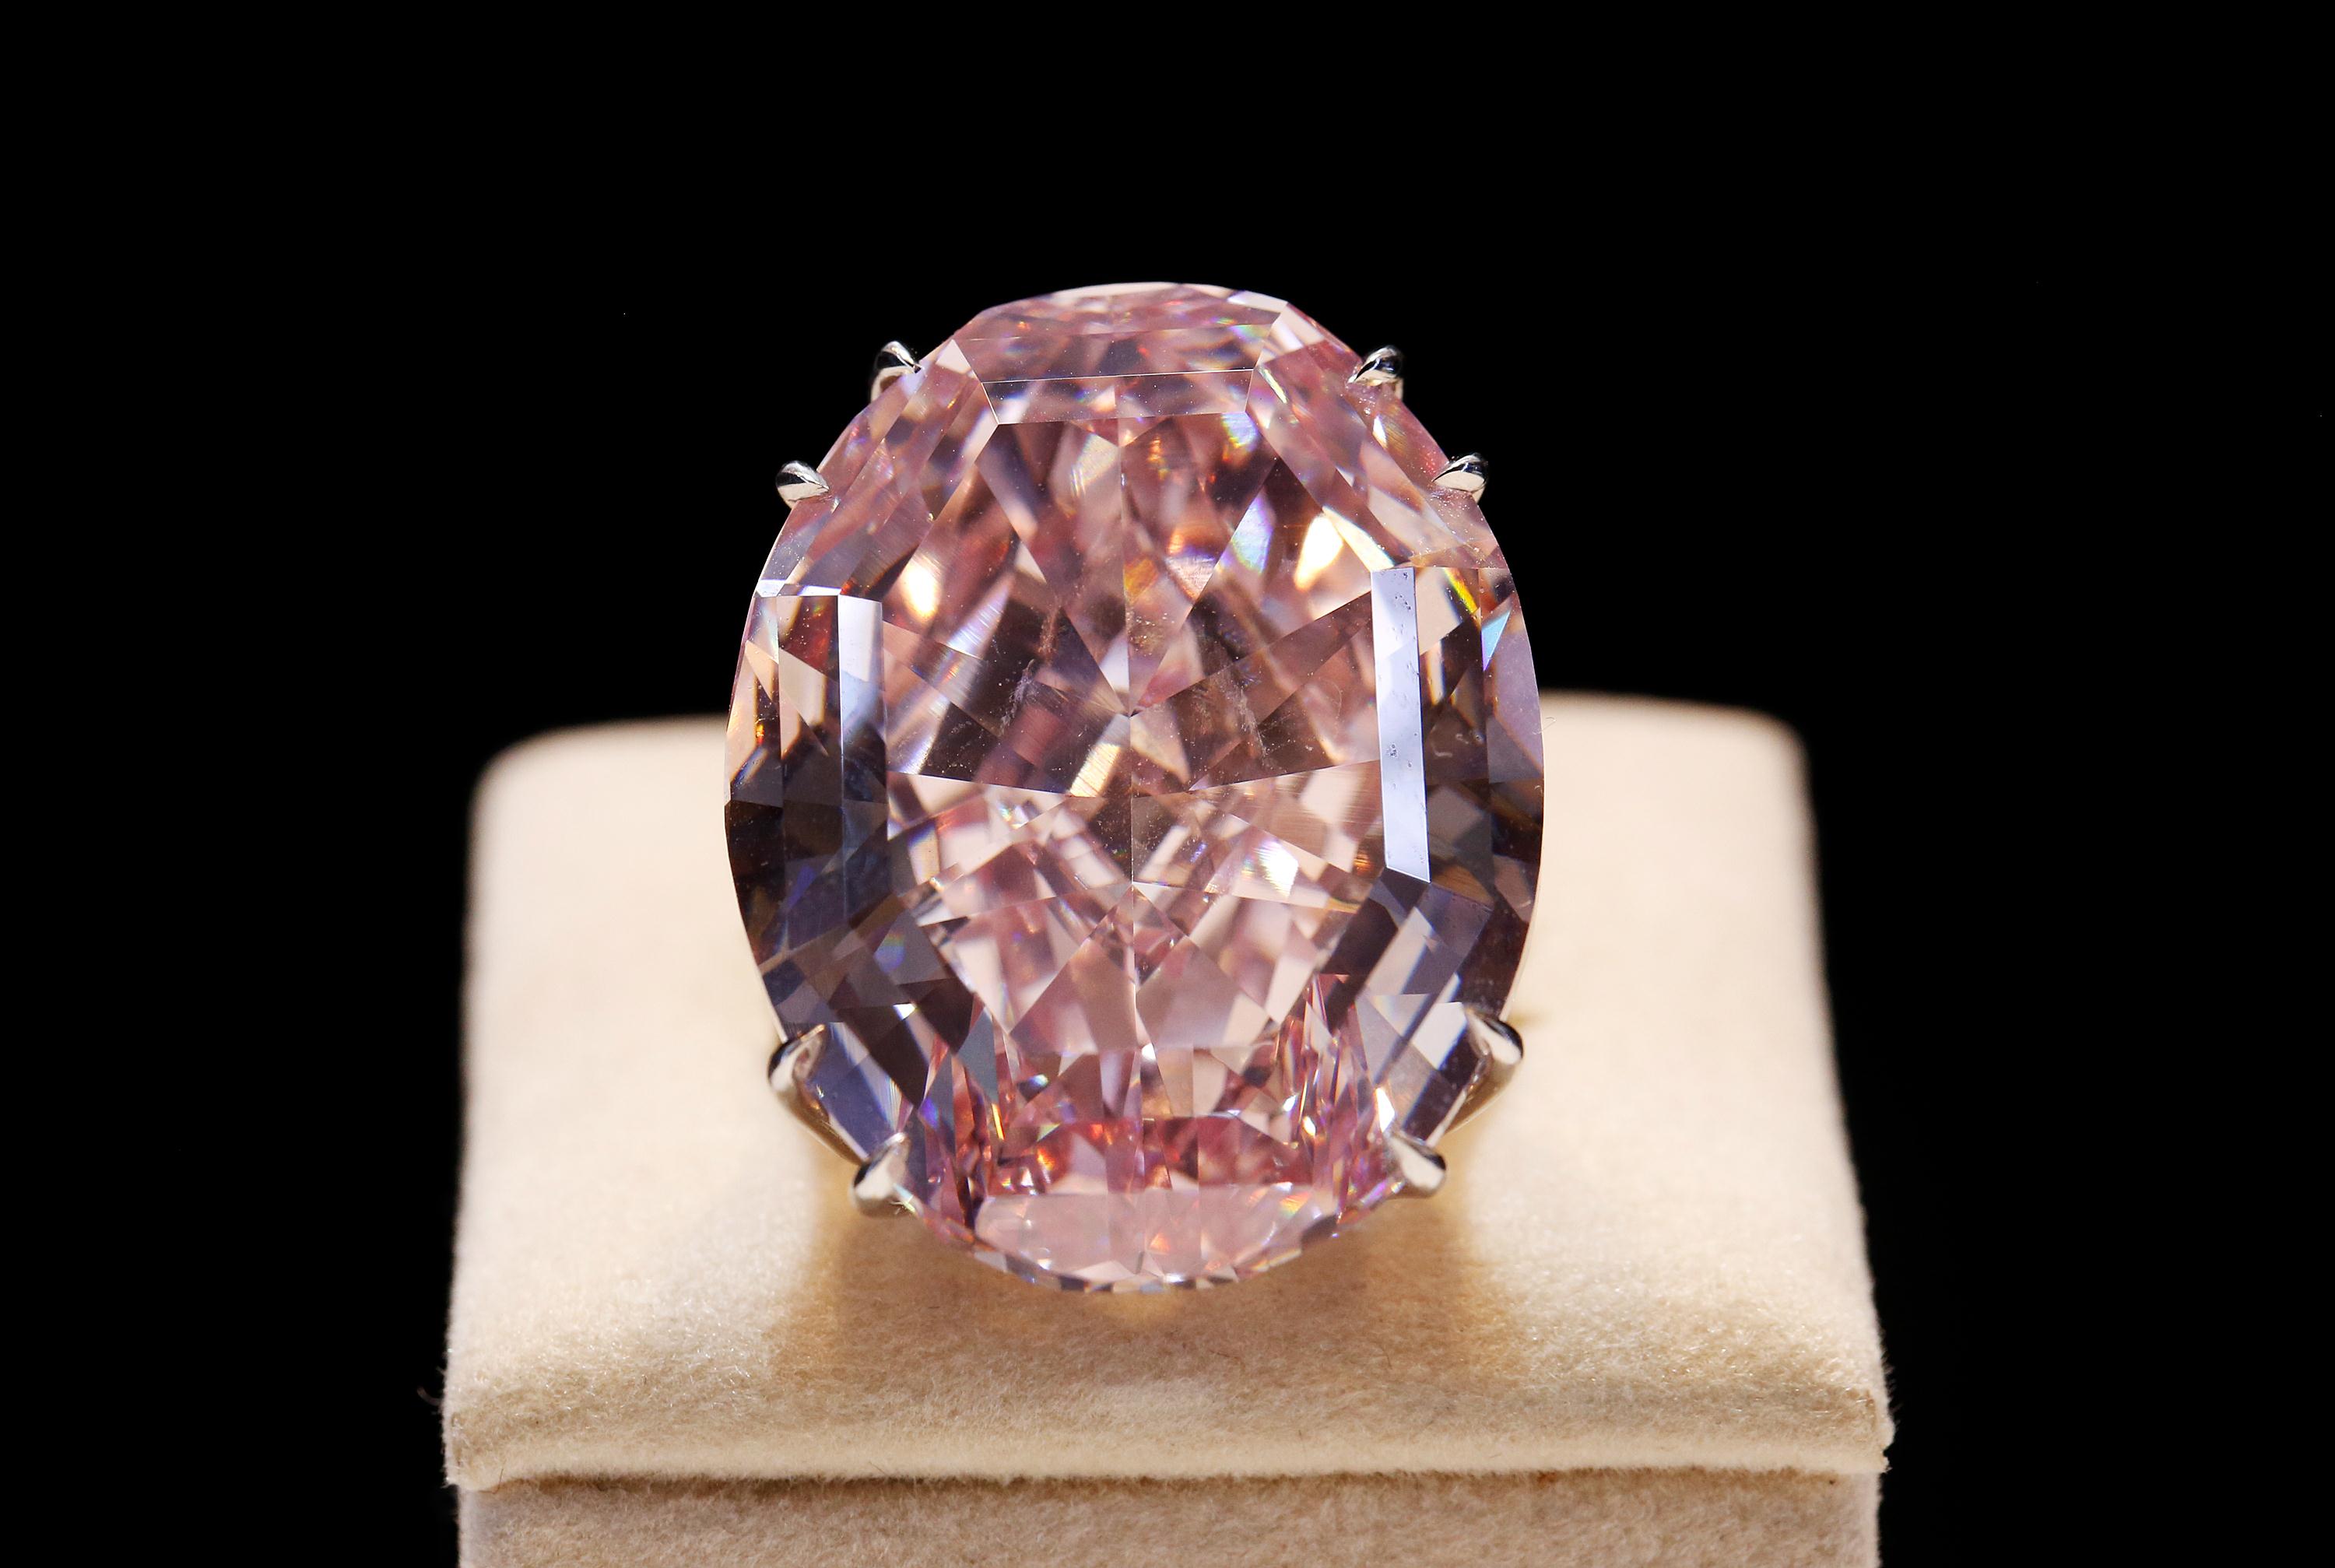 The World's Most Famous Pink Diamonds